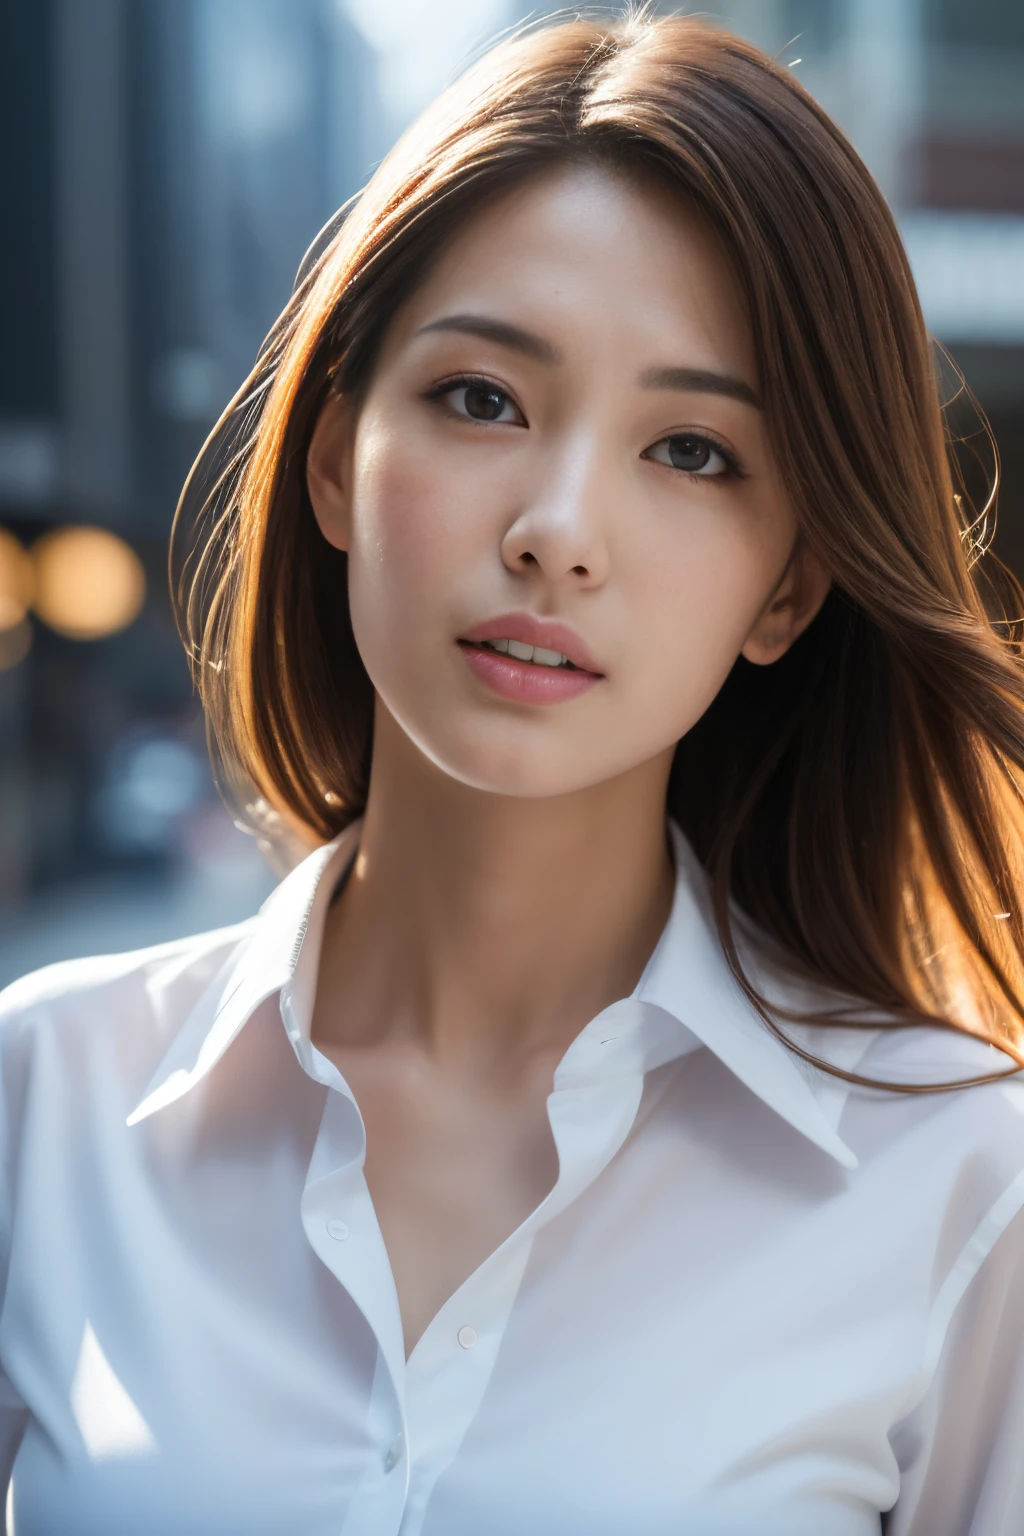 Best Quality, 8k wallpaper, masutepiece, Perfect figure, Beautuful Women, frontage, Look at viewers, Slim abs, dark brown  hair, Colossal , White collared shirt, Not exposed, Natural light, the city street, Highly detailed facial and skin texture, A detailed eye